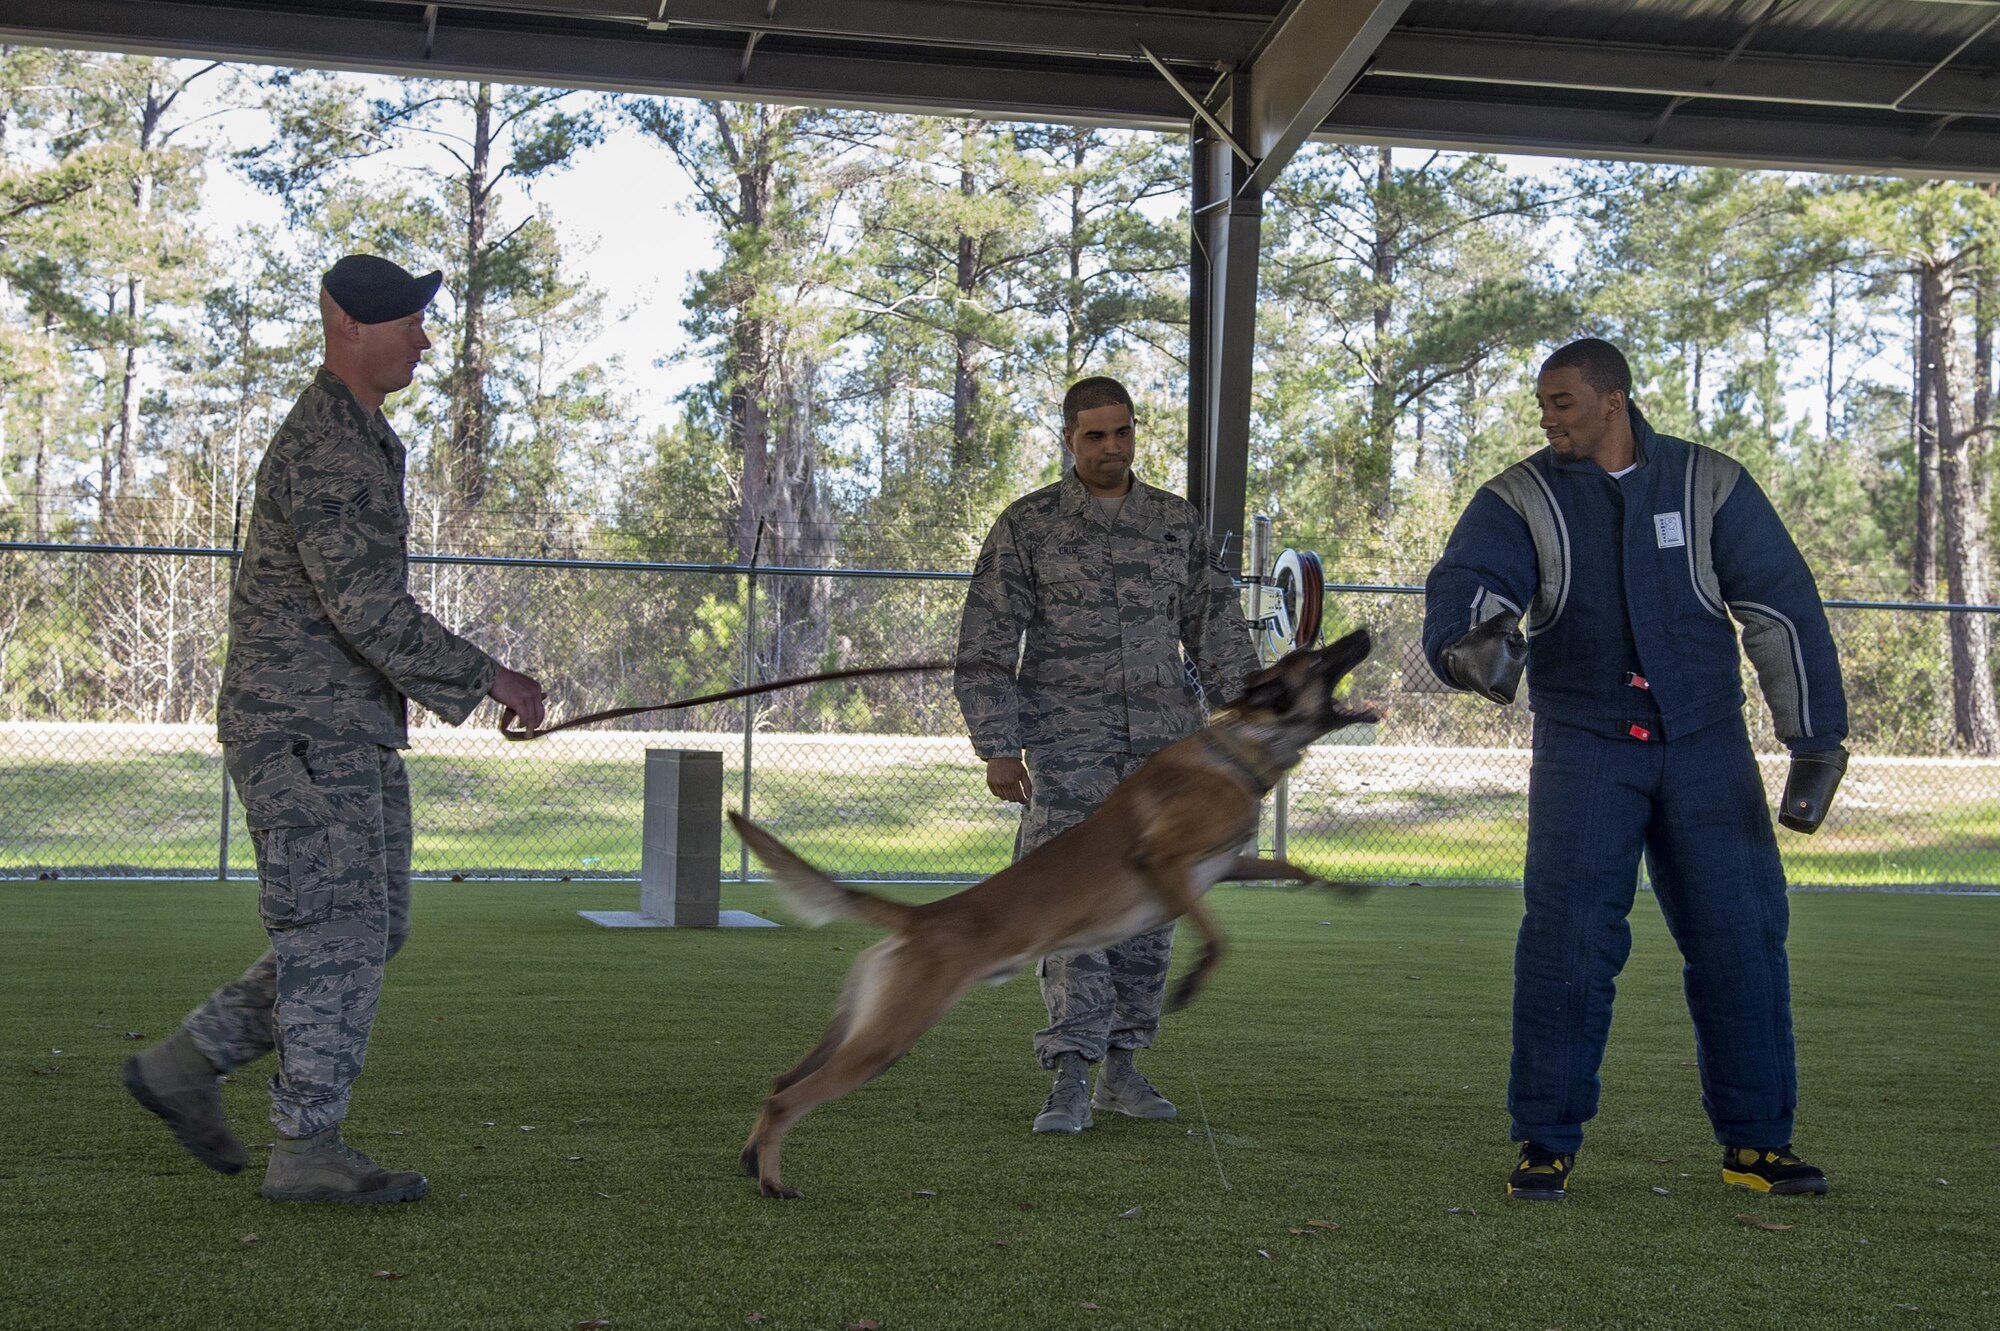 Malcolm Mitchell, right, New England Patriots’ wide receiver and Super Bowl LI Champion, is attacked by Military Working Dog Ttoby during a visit March 7, 2017, at Moody Air Force Base, Ga. Mitchell, a Valdosta native, got a glimpse of a typical day in the life of Moody Airmen. Mitchell also spent time with Airmen and signed autographs for local Patriots’ fans during his visit. (U.S. Air Force photo by Senior Airman Ceaira Young)